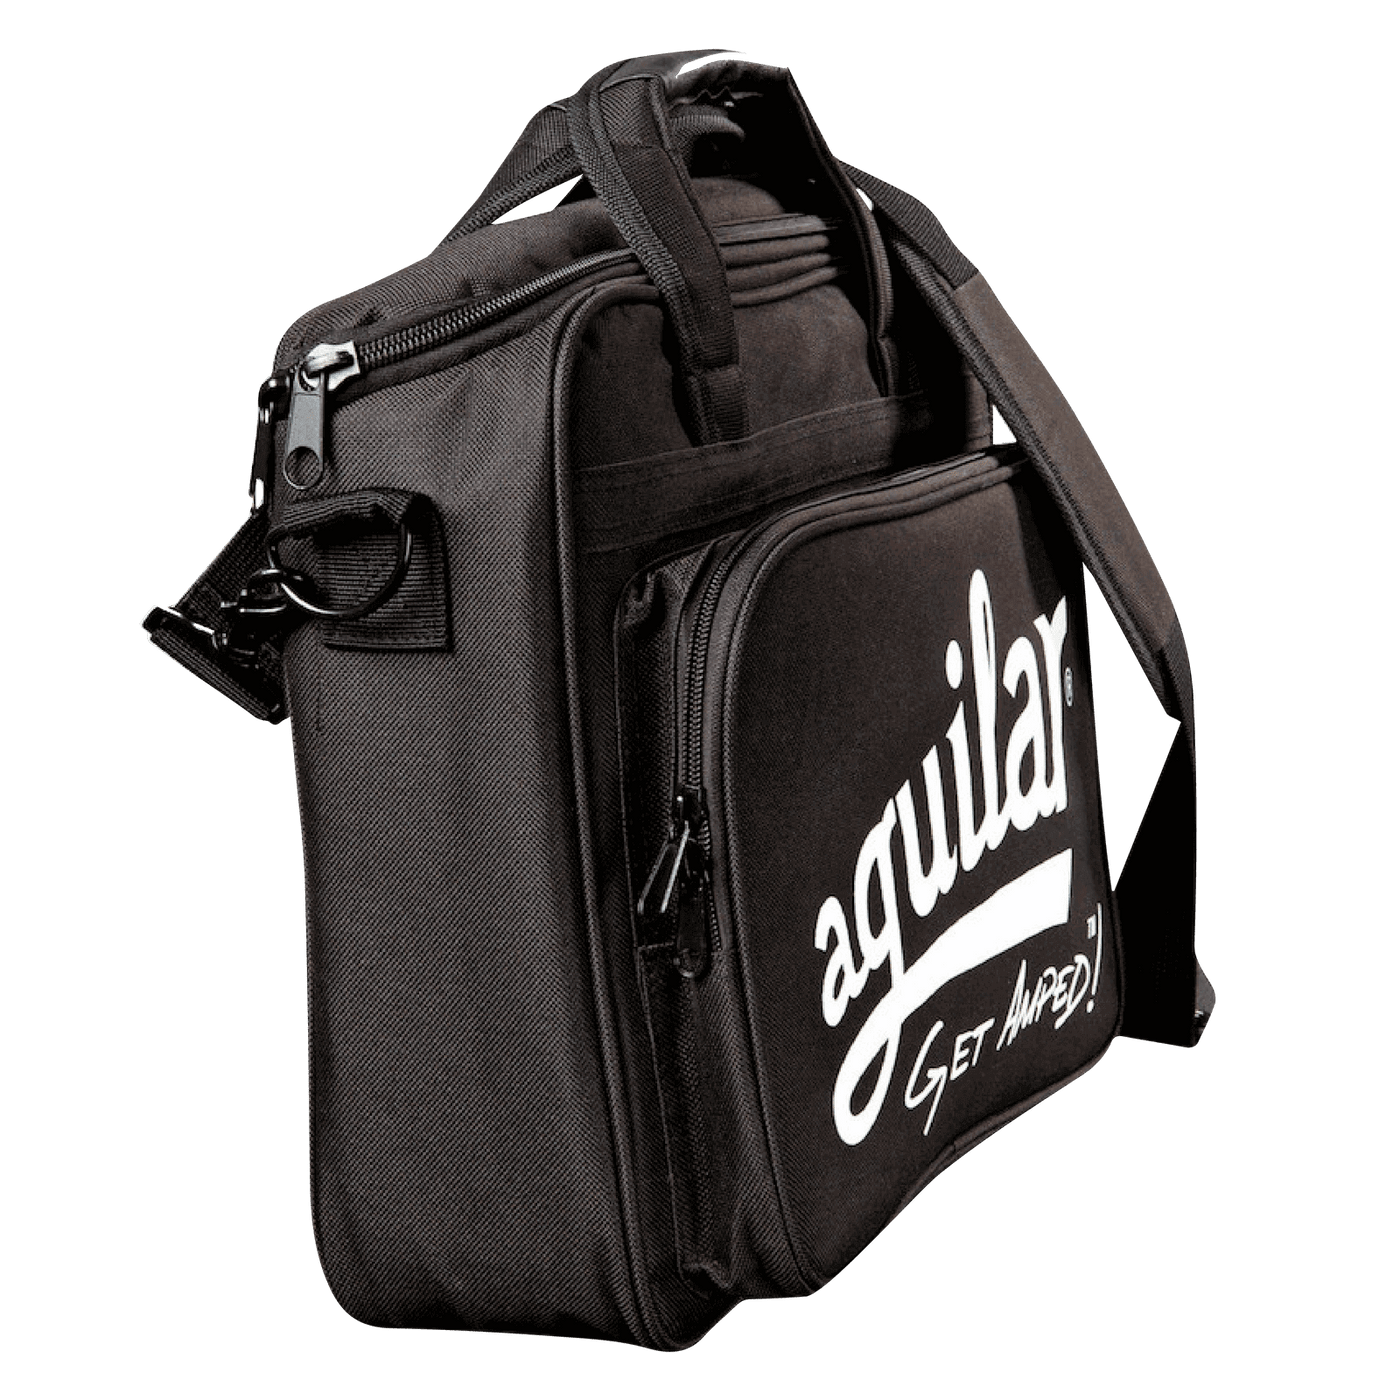 Funda Aguilar Tone Hammer 500 - This padded carrying bag is the perfect fit for the Tone Hammer 500. The side pocket is big enough to fit cables, tuner, or other small accessory items. A detachable shoulder strap makes the bag even easier to carry when yo